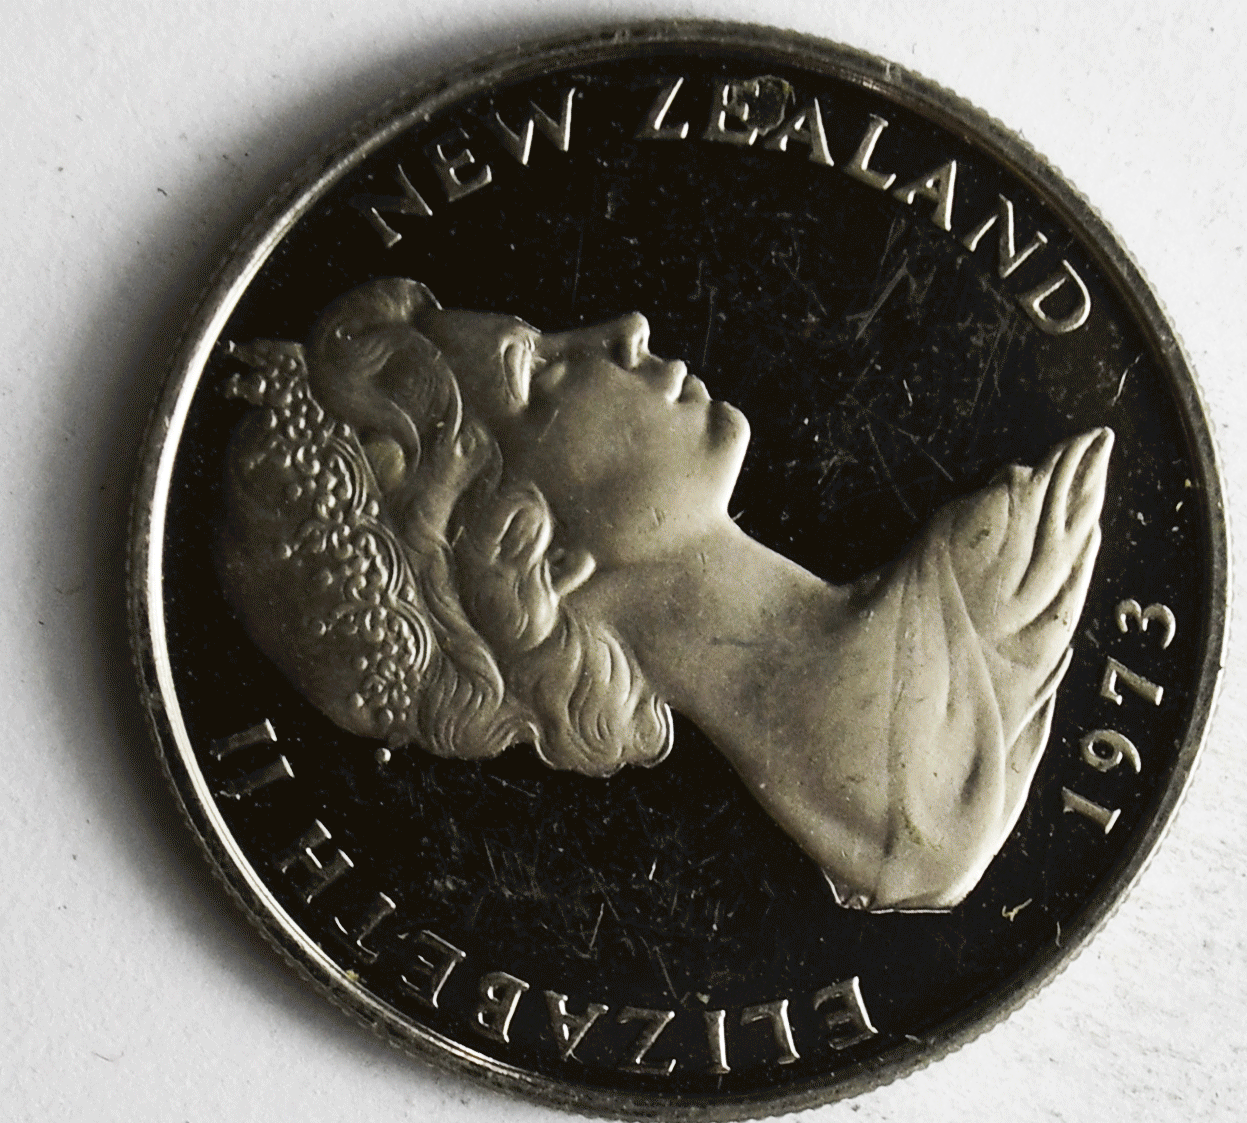 1973 New Zealand Proof 10 Ten Cents KM# 41.1 Only 8,000 Minted